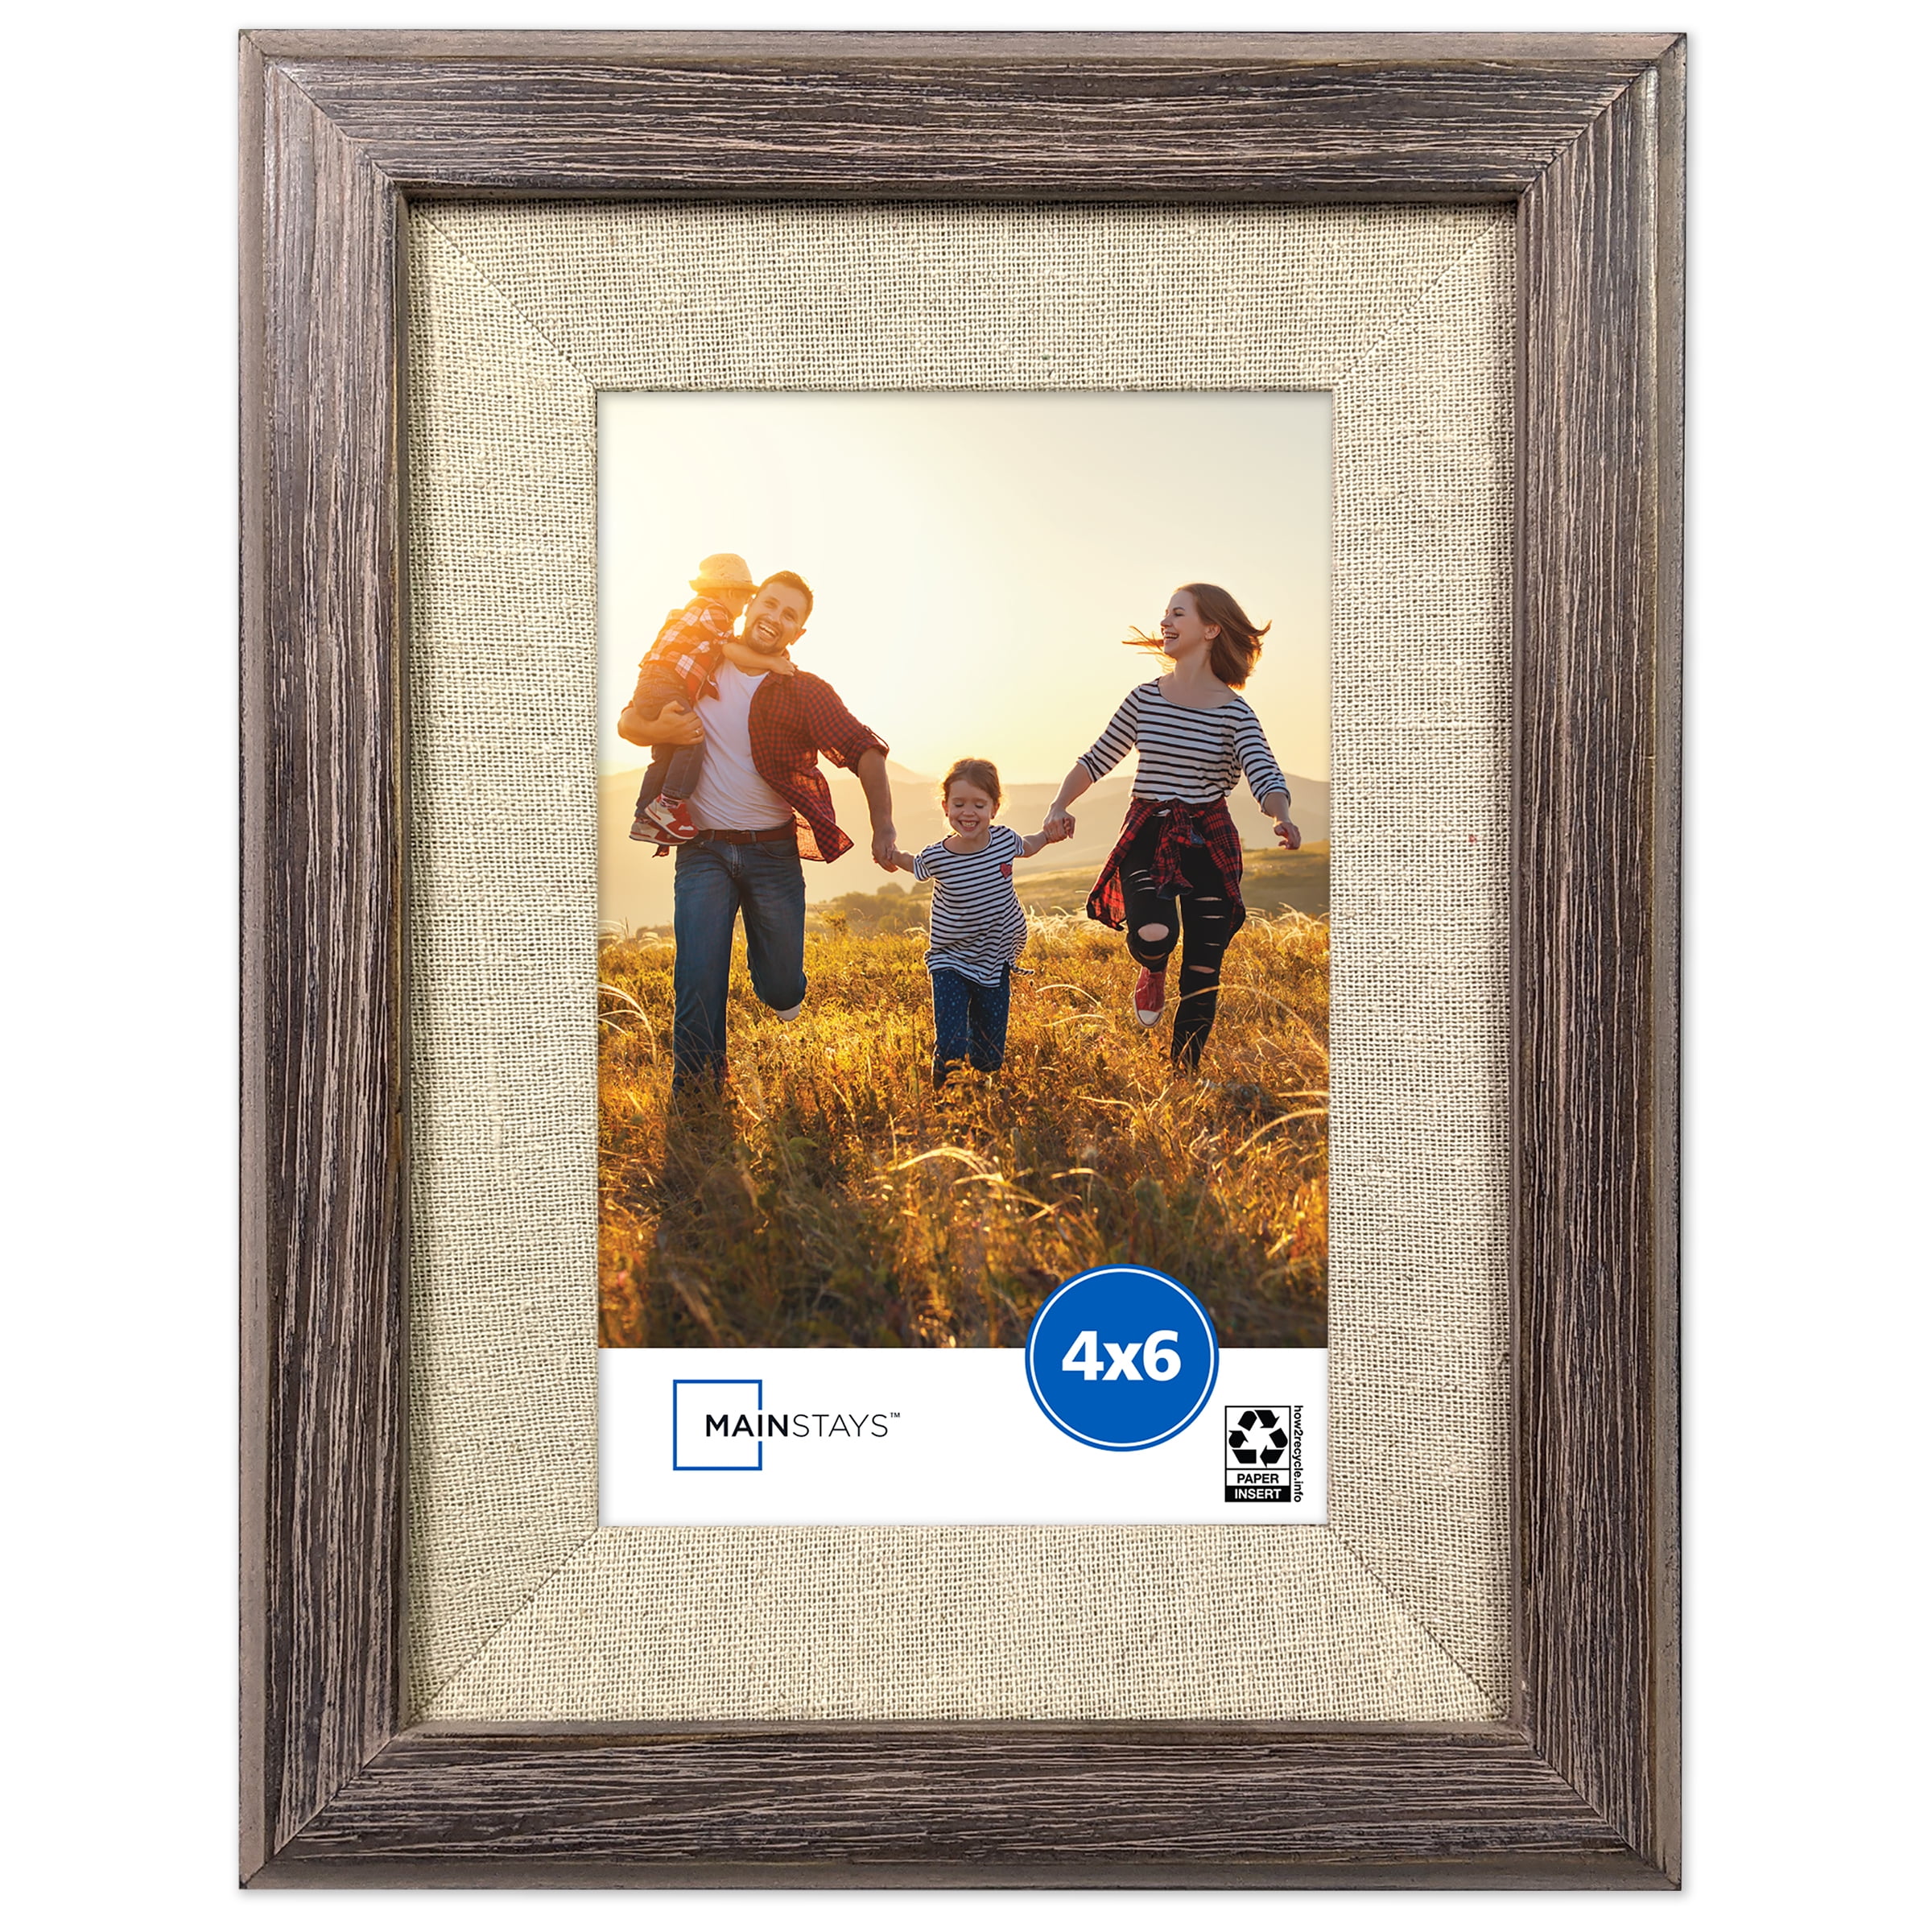 Decor Home 6x4 Solid Wood Picture Photo Frame (Brown)